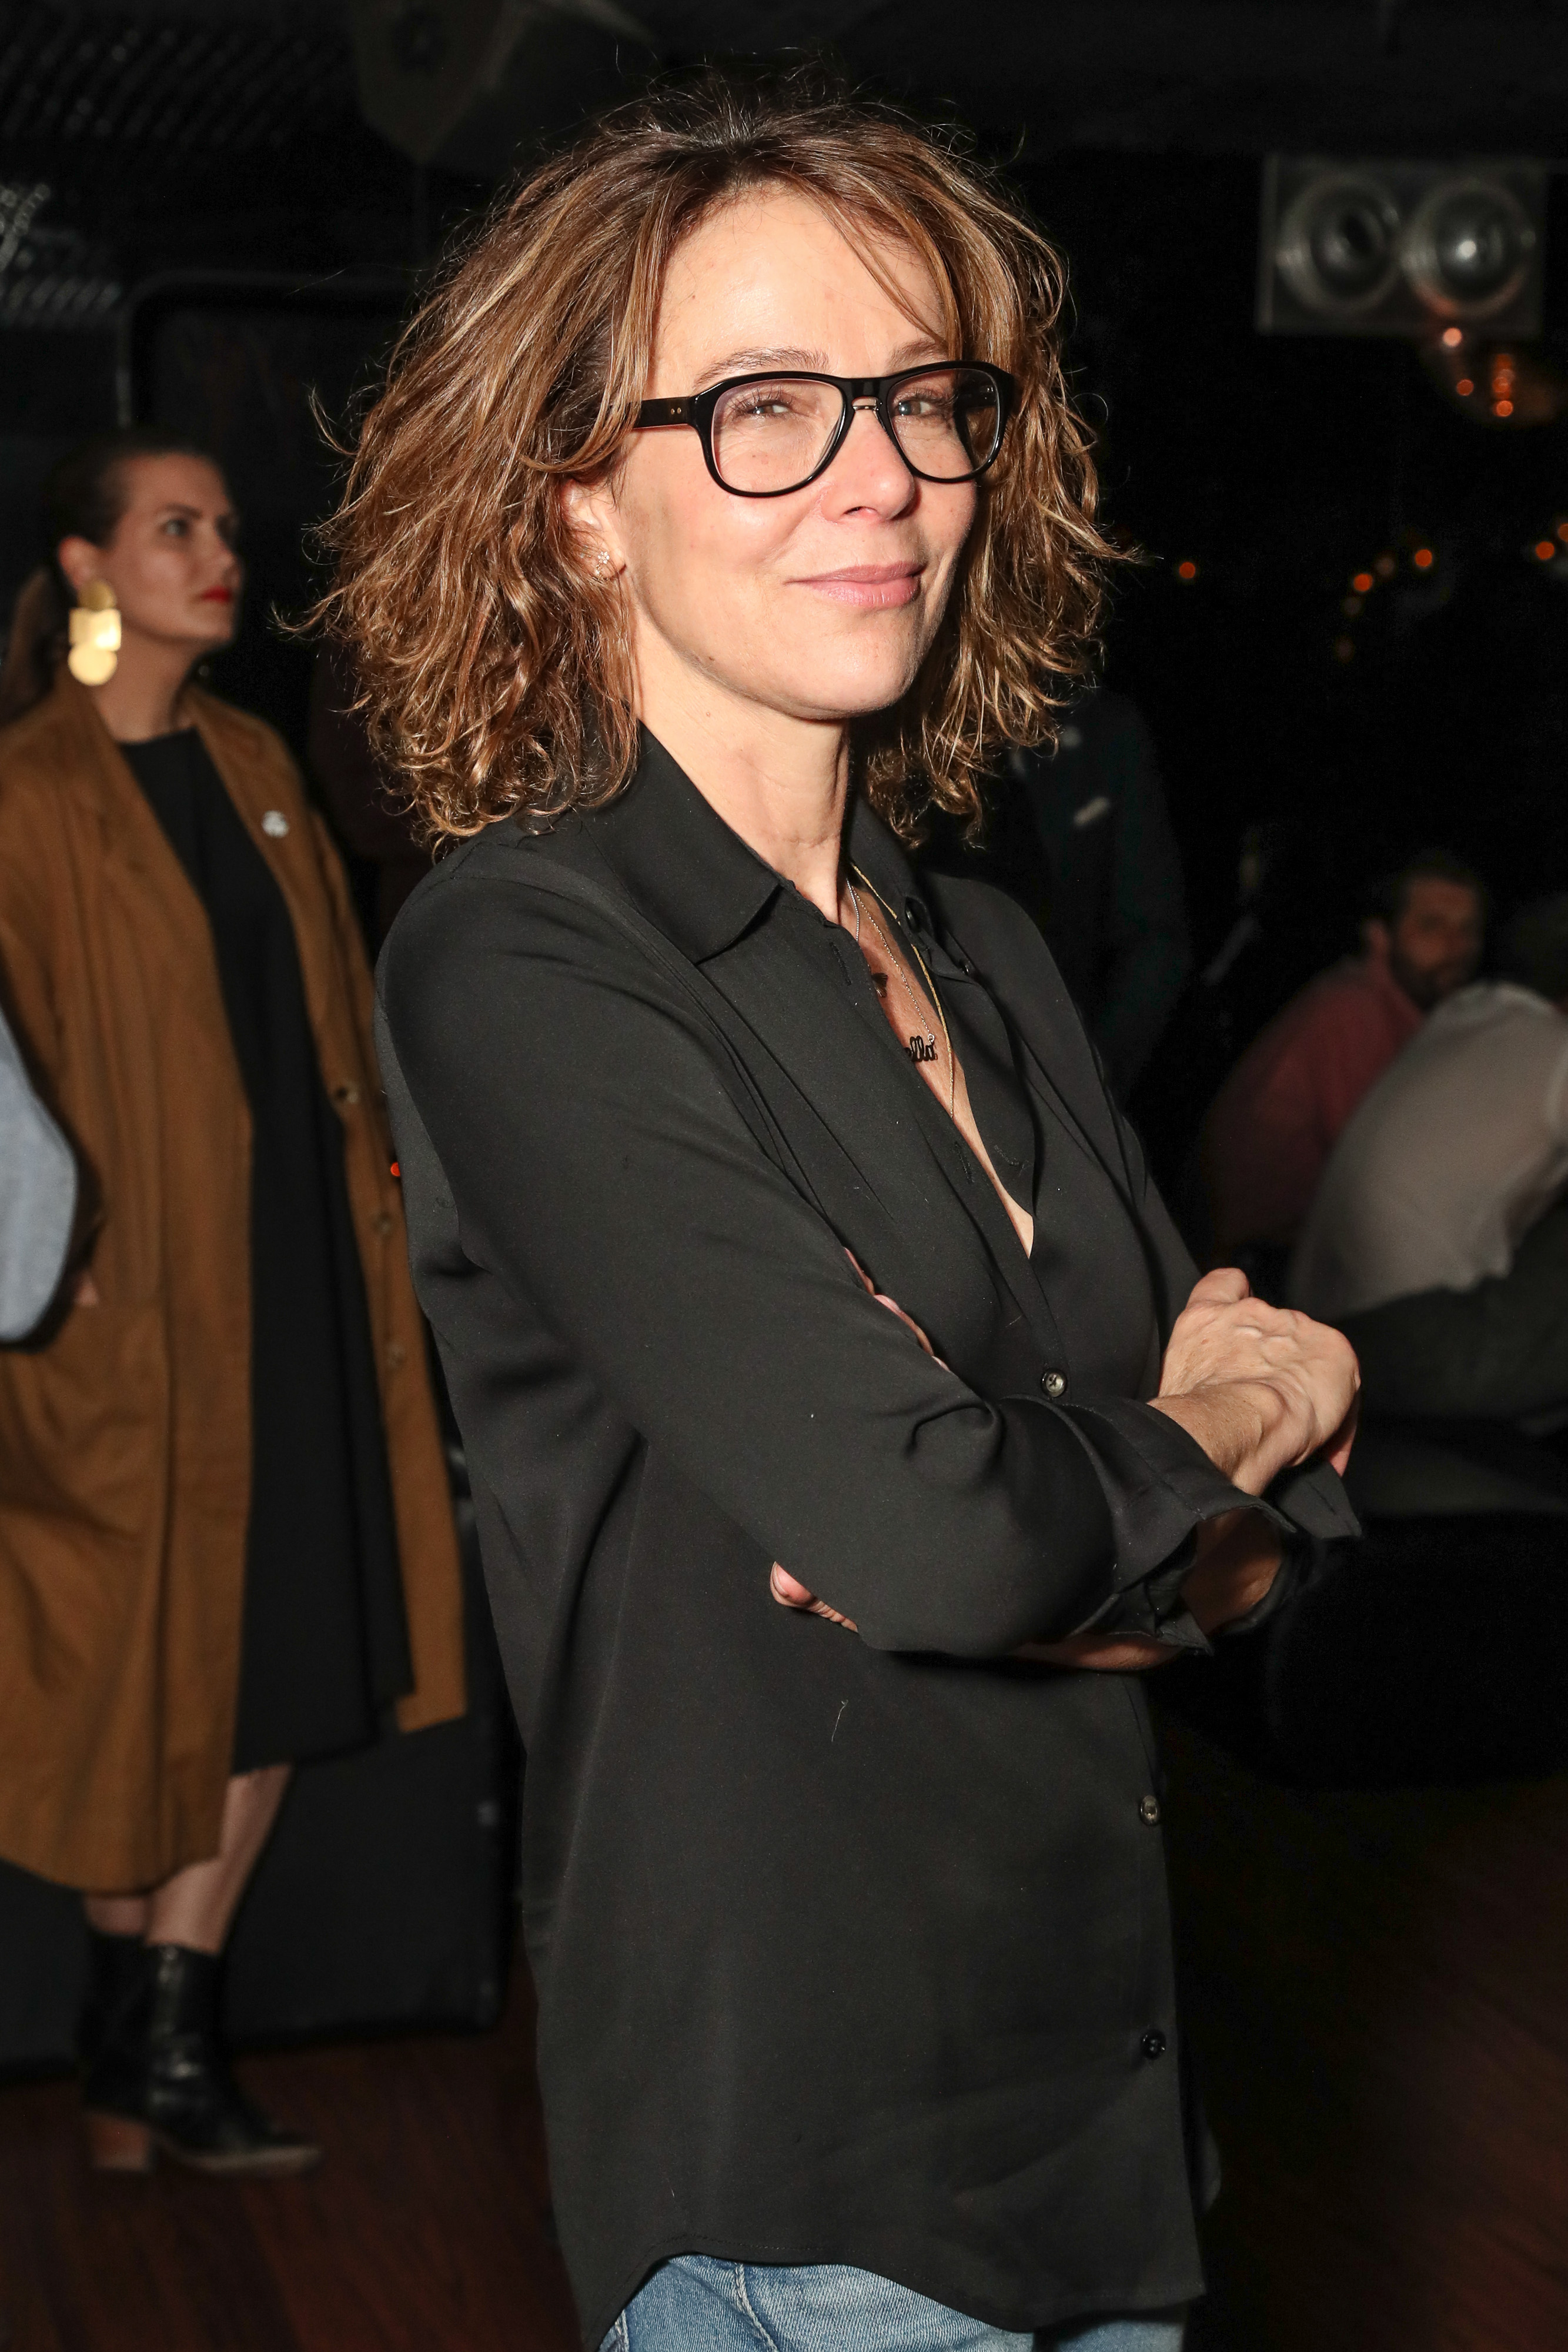 Jennifer Grey at the Zoe Buckman 'CHAMP' opening in Los Angeles, on February 27, 2018. | Source: Getty Images